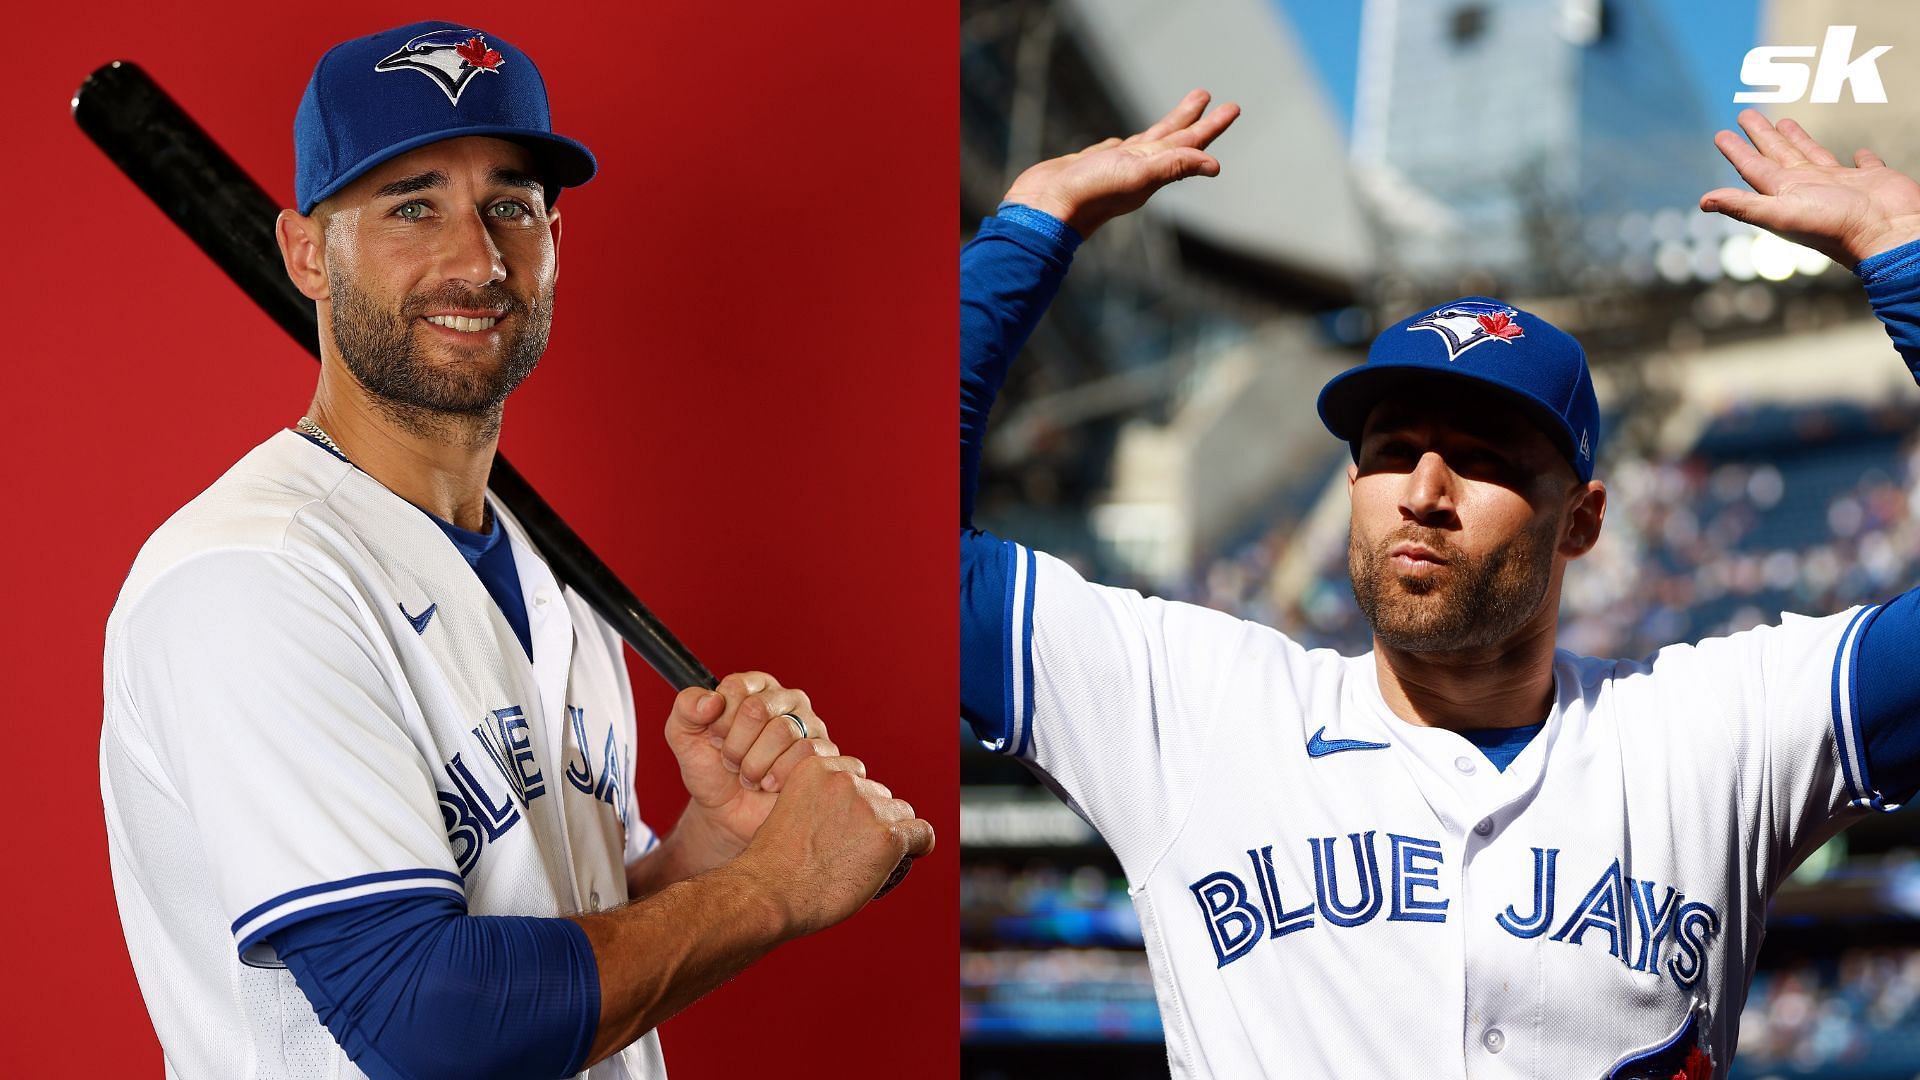 Kevin Kiermaier reflects on returning to Toronto after a $10.5 million contract renewal with the Blue Jays